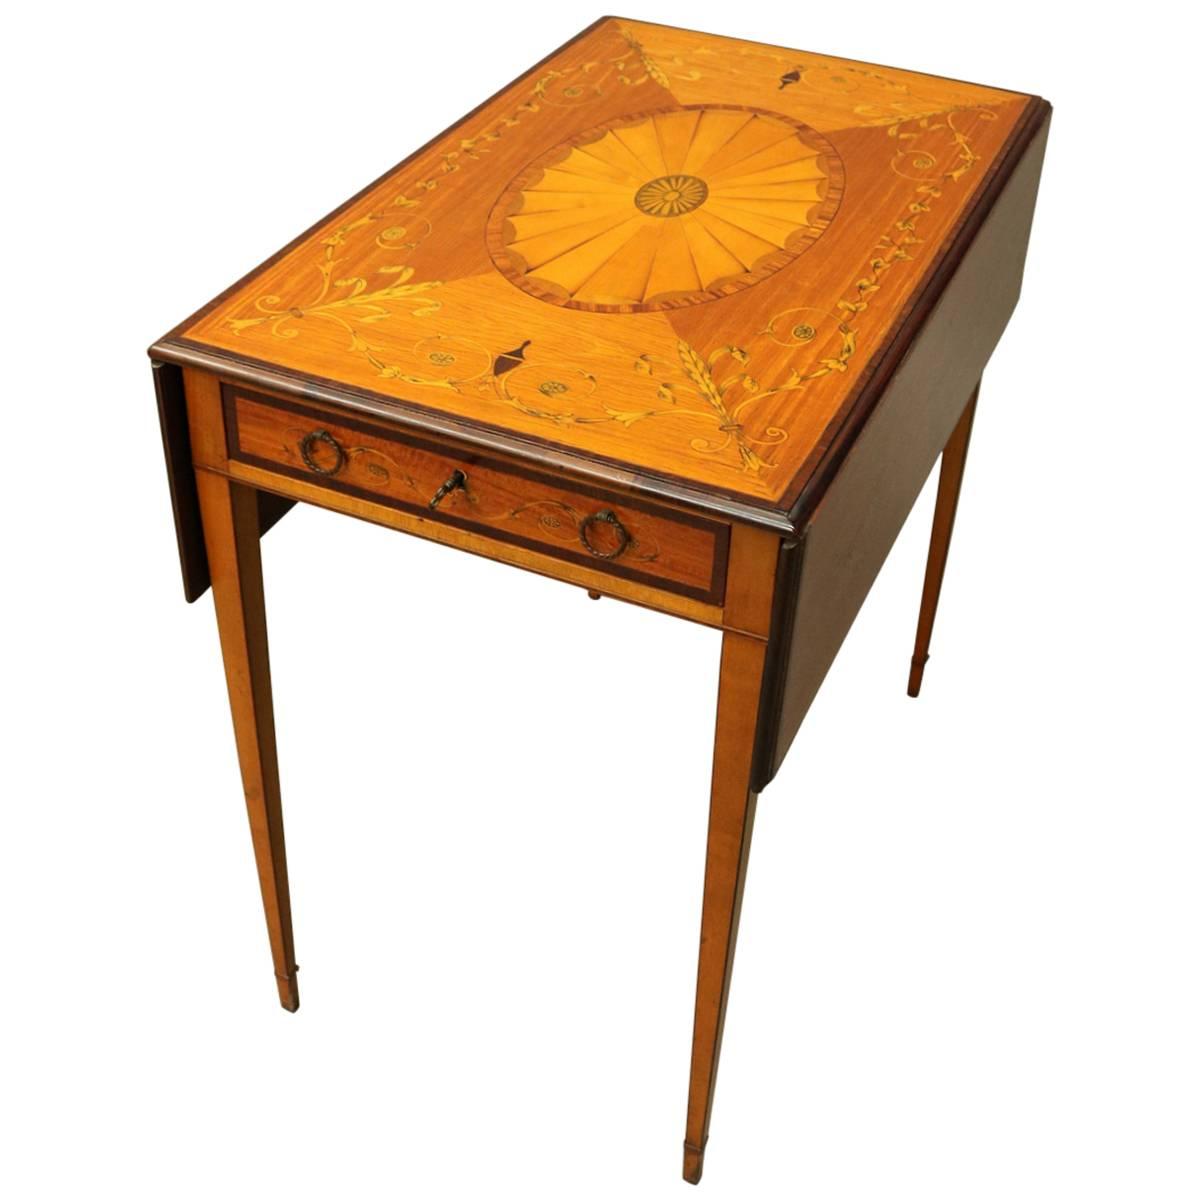 Antique Adams Style Rosewood and Mahogany Marquetry Pembroke Table, circa 1900